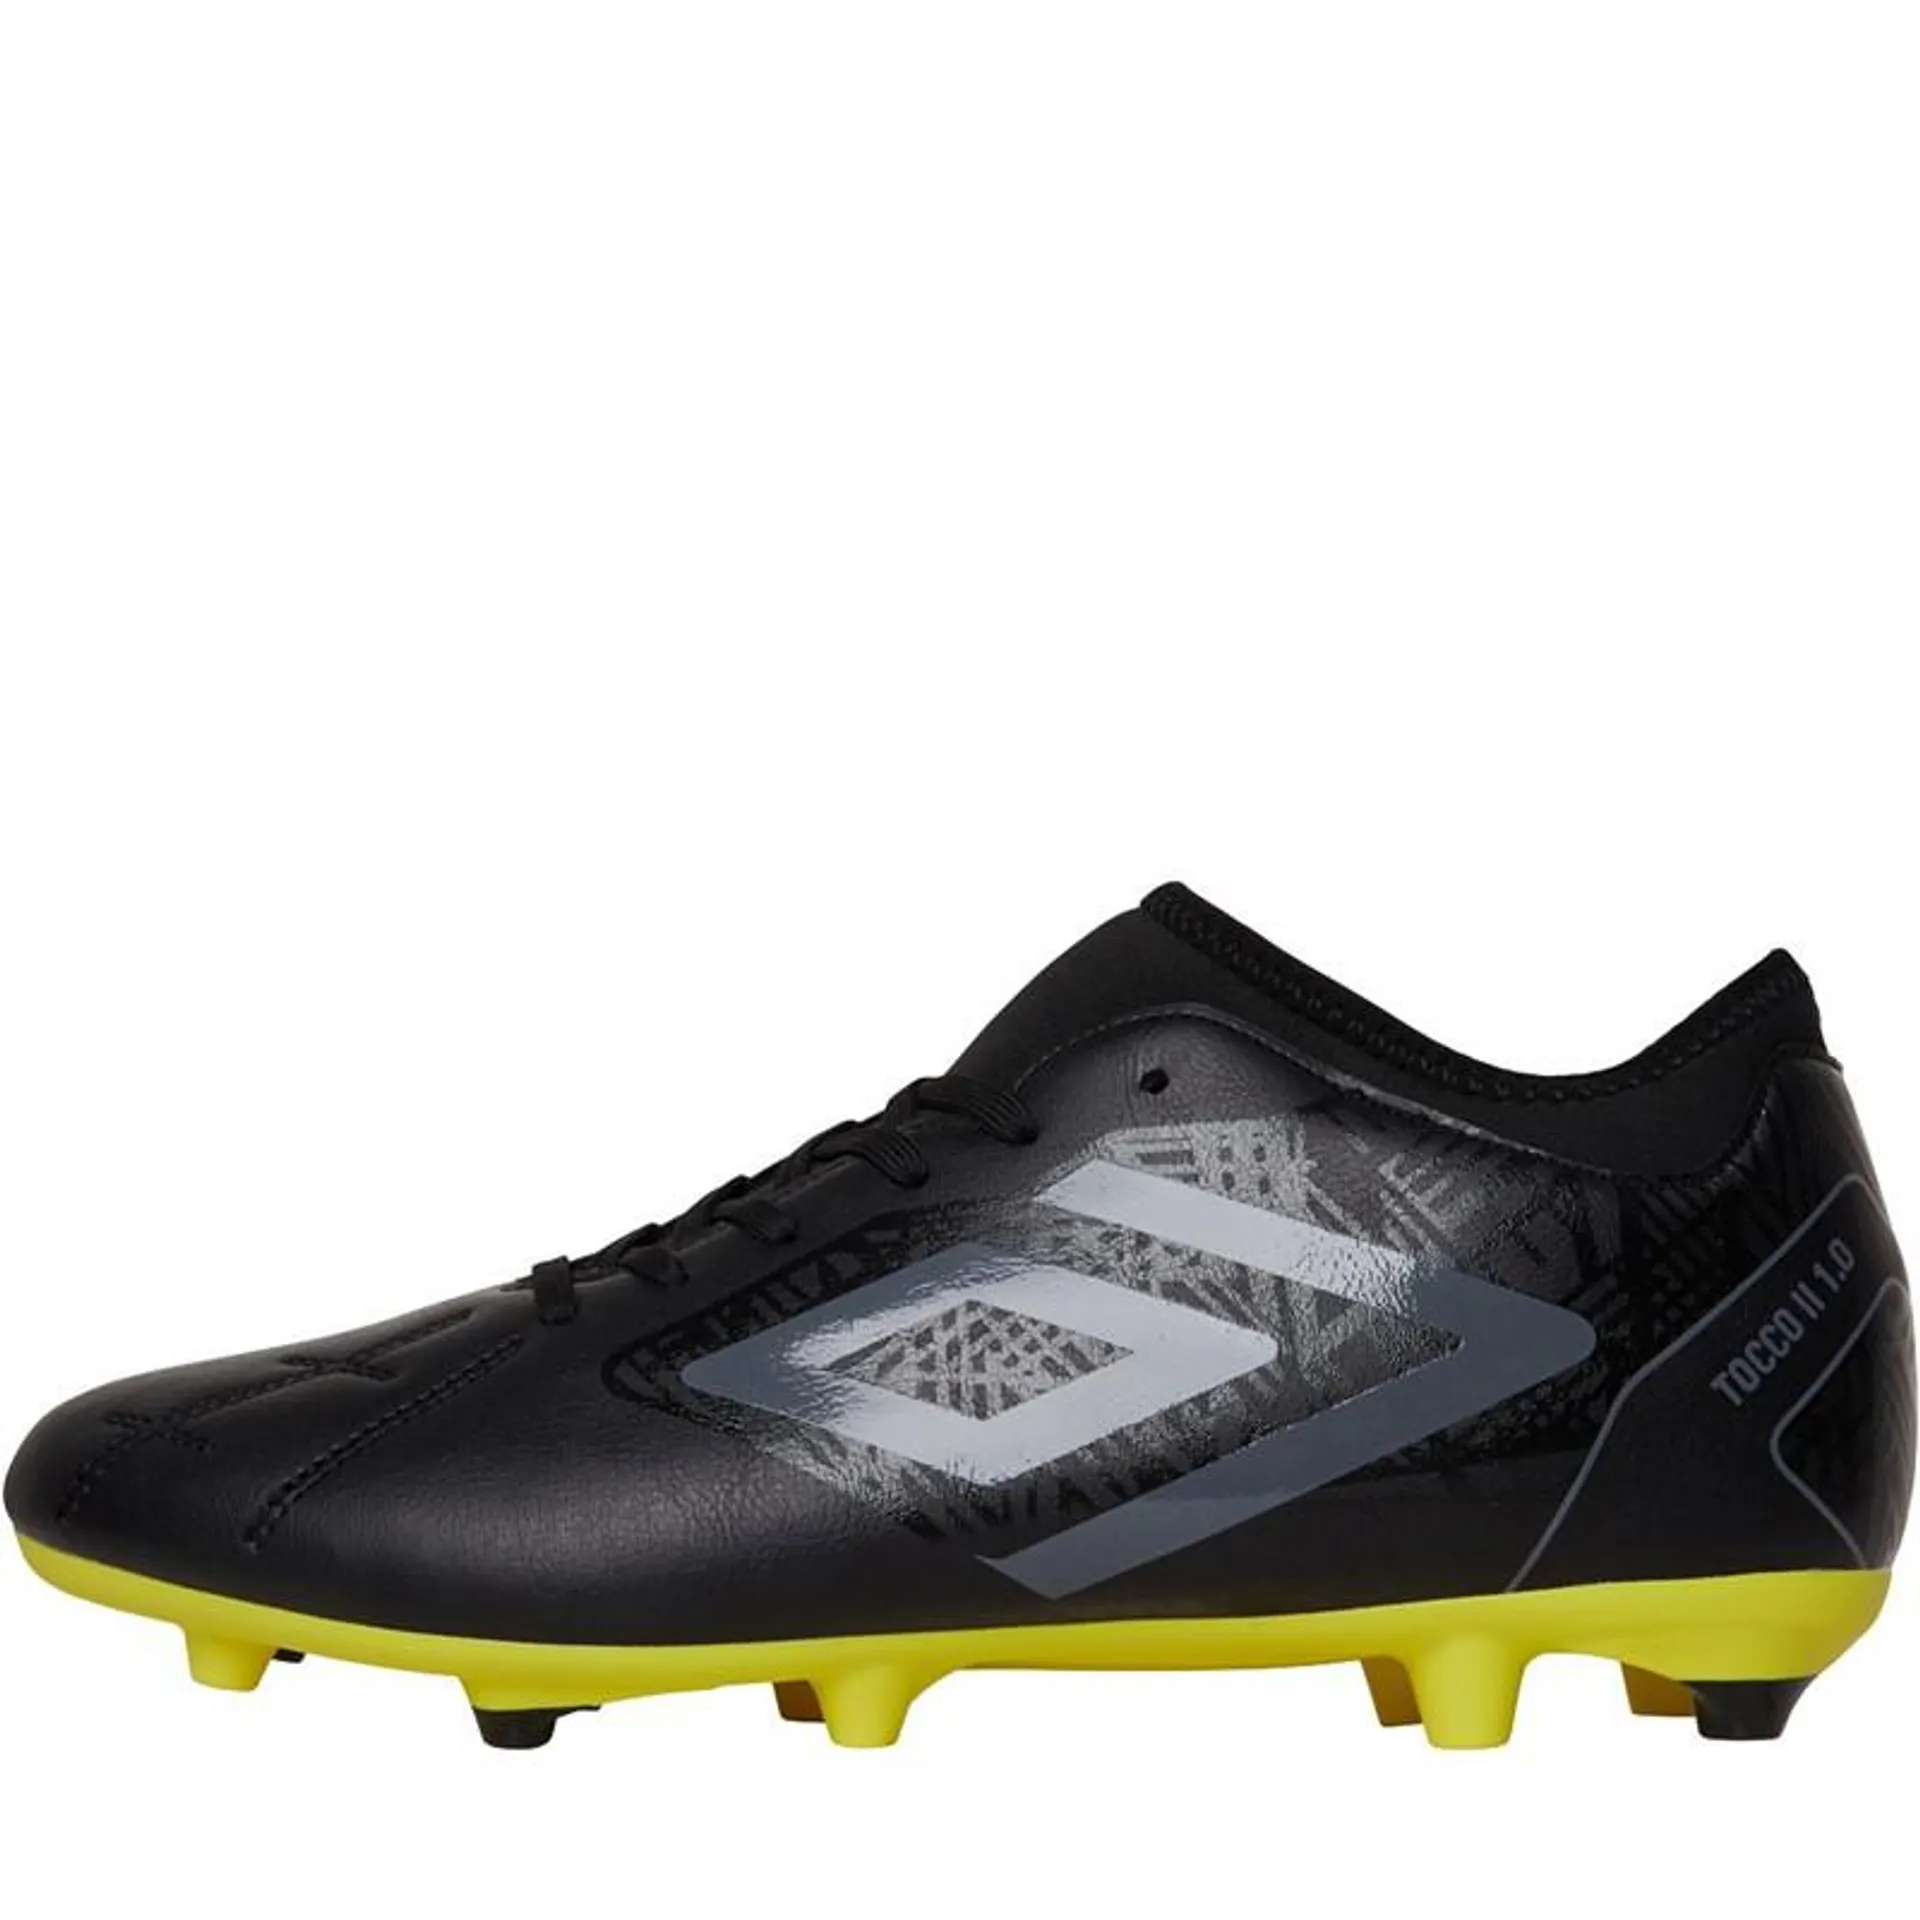 Umbro Mens Tocco II 1.0 FF Firm Ground Football Boots Black/Quiet Shade/Limeade